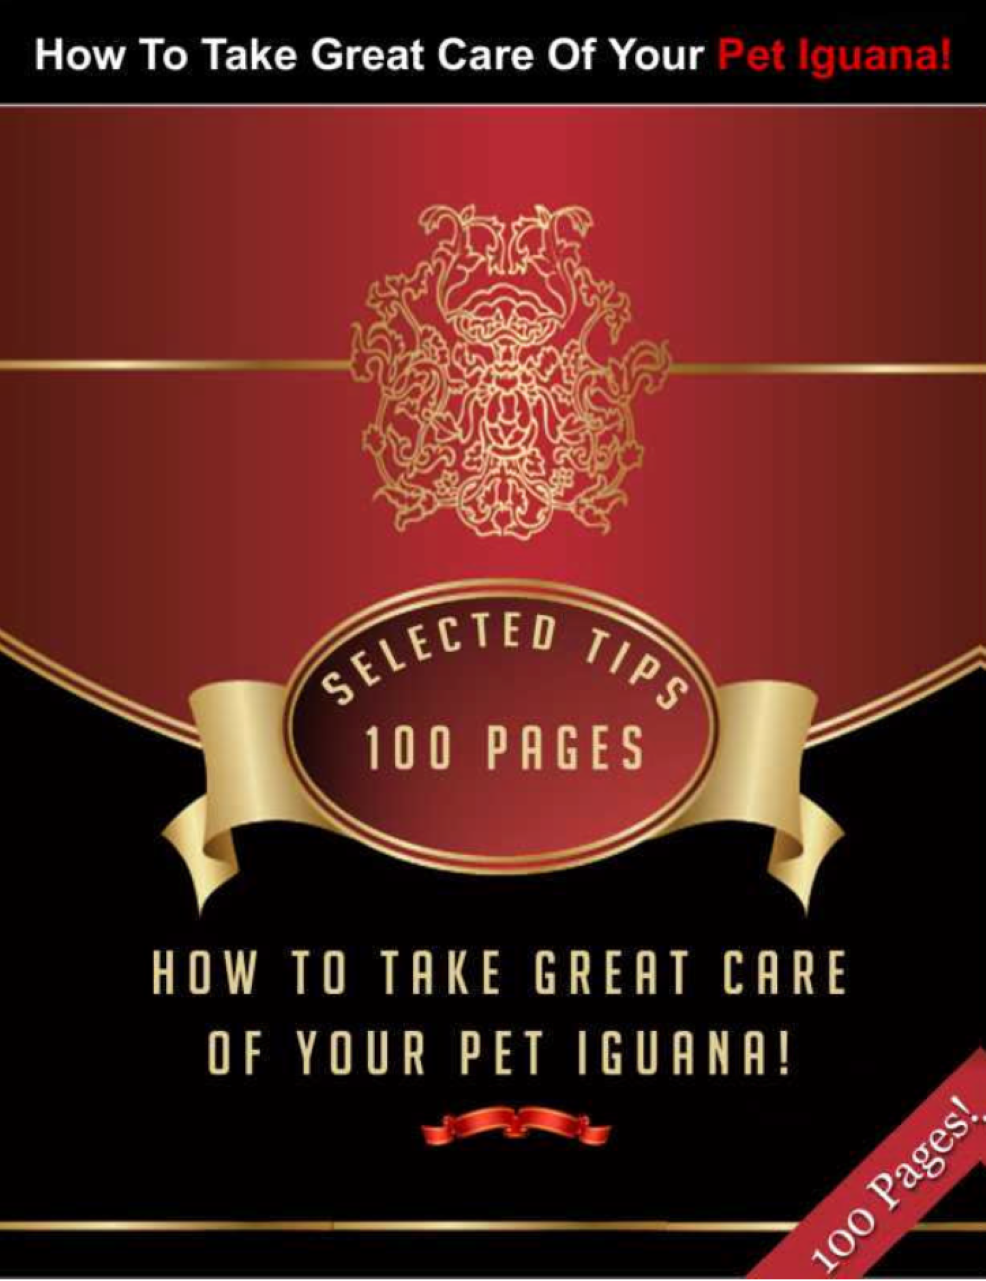 Take Great Care Of Your Pet Iguana With These Selected Tips